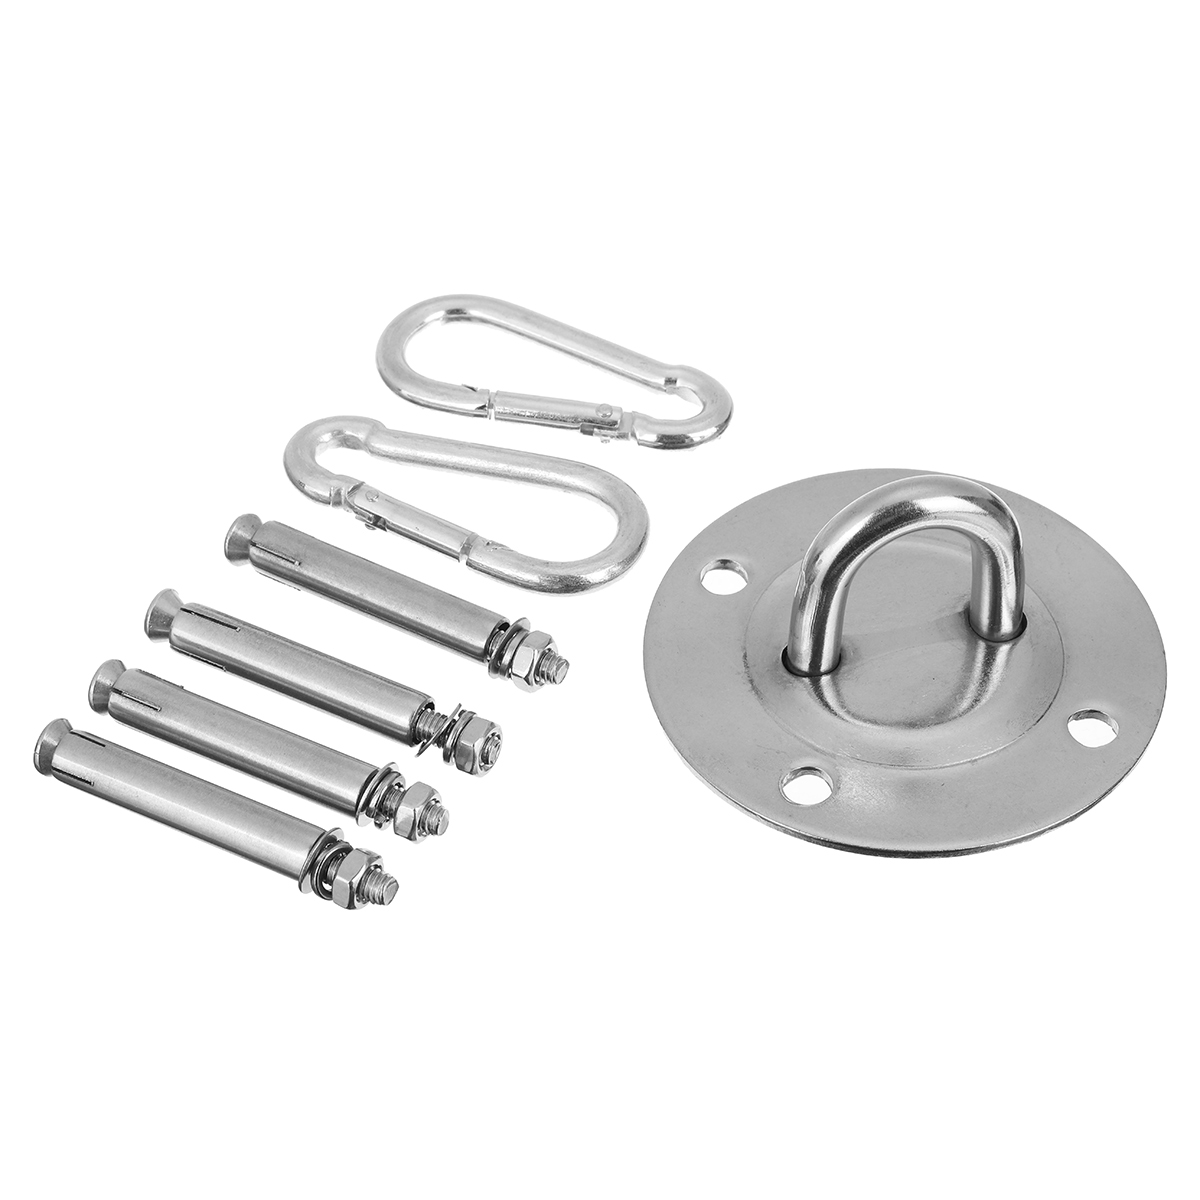 330LB-Hammock-Chair-Hanging-Accessories-Stainless-Steel-Swivell-Hook-Ceiling-1758255-6